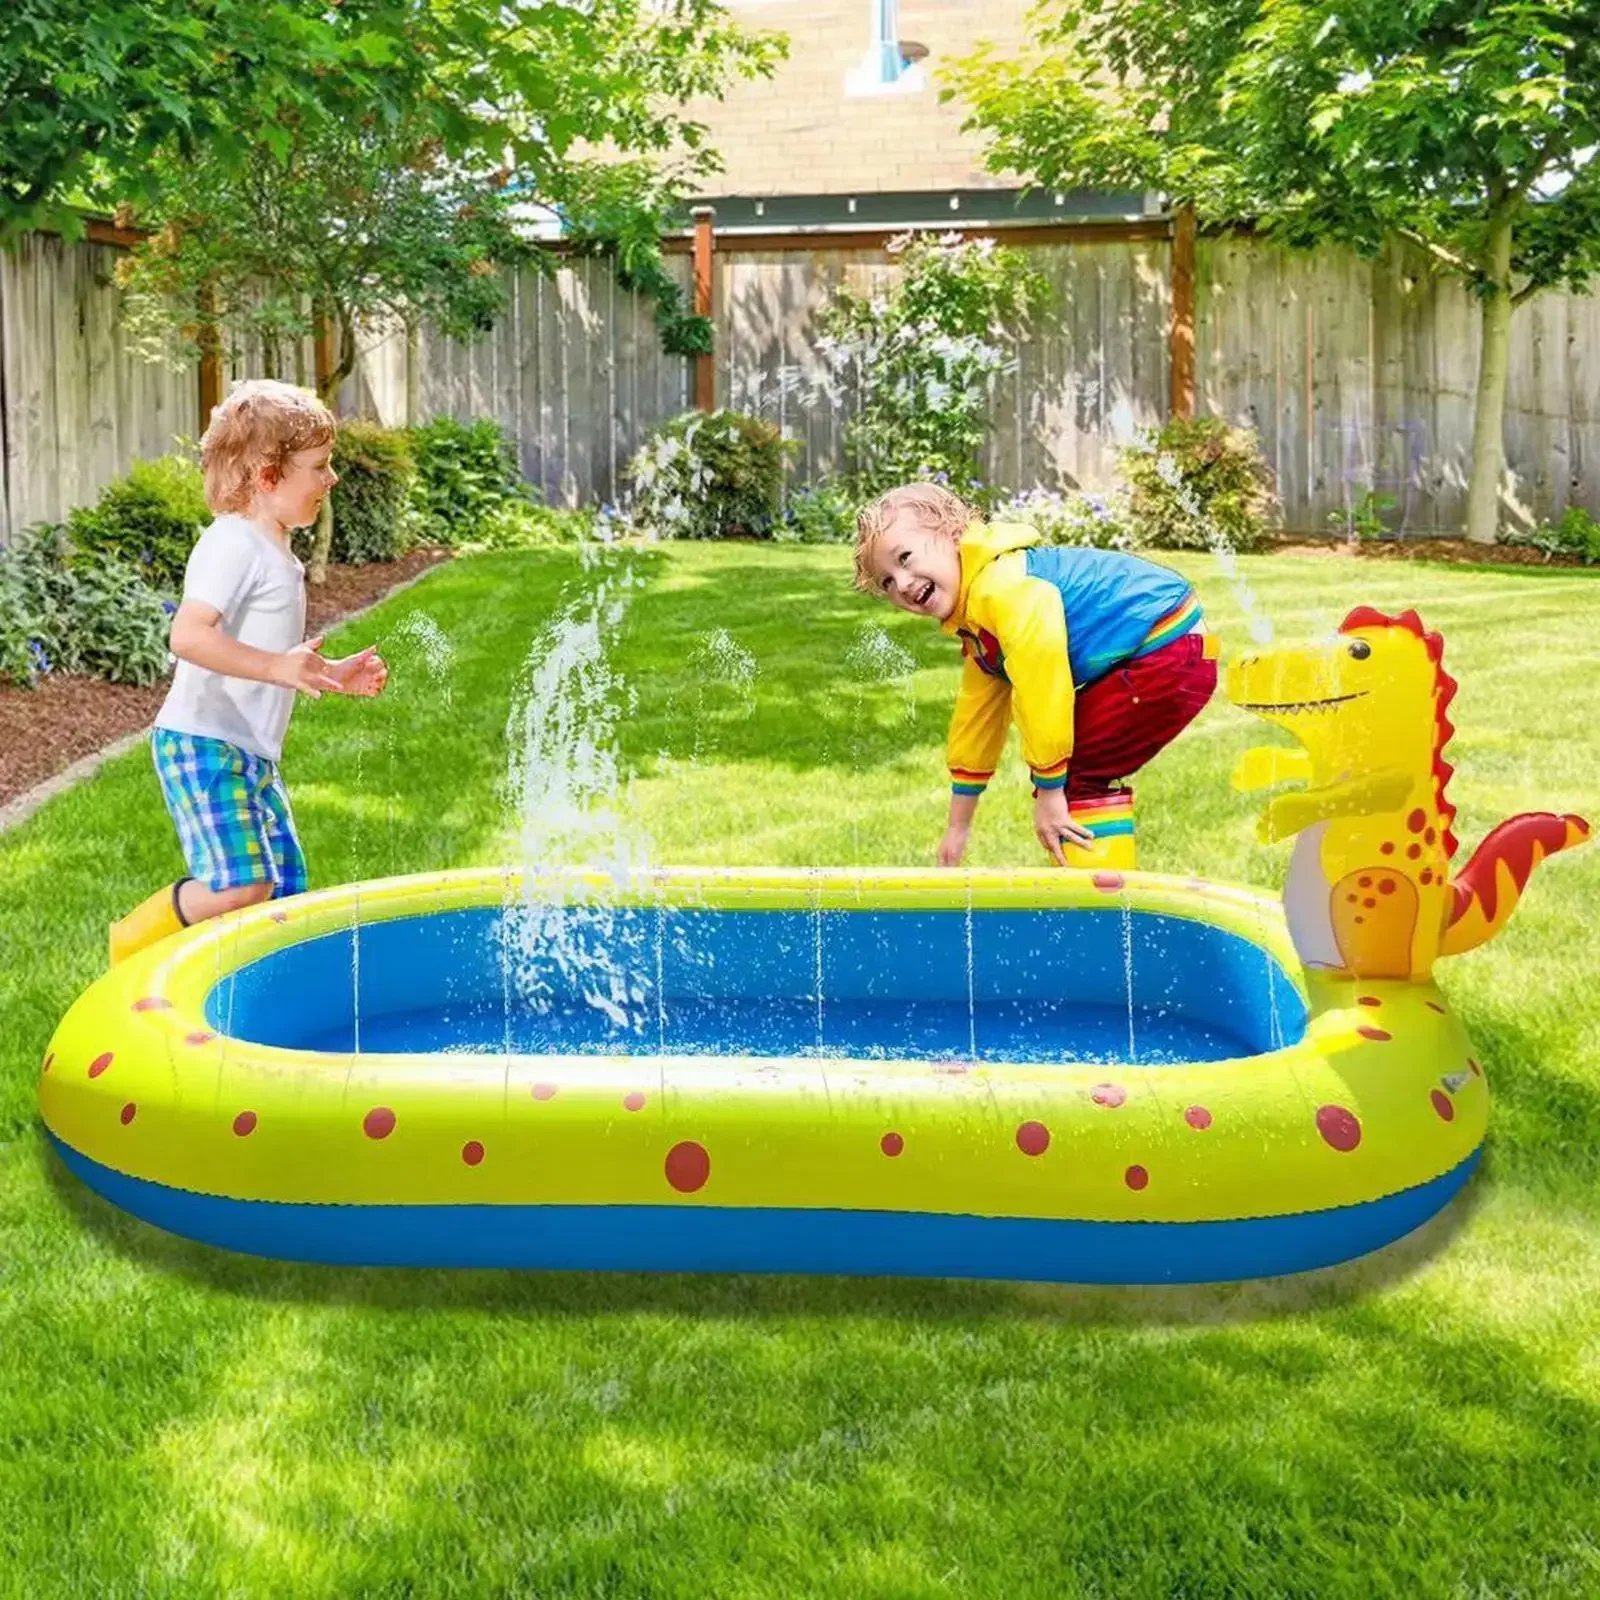 

Water Outdoor For Backyard 3 Children in Sprinkler Pool Splash Baby Fun 1 Cushion Toys Inflatable Gift Toddlers Kids Pad